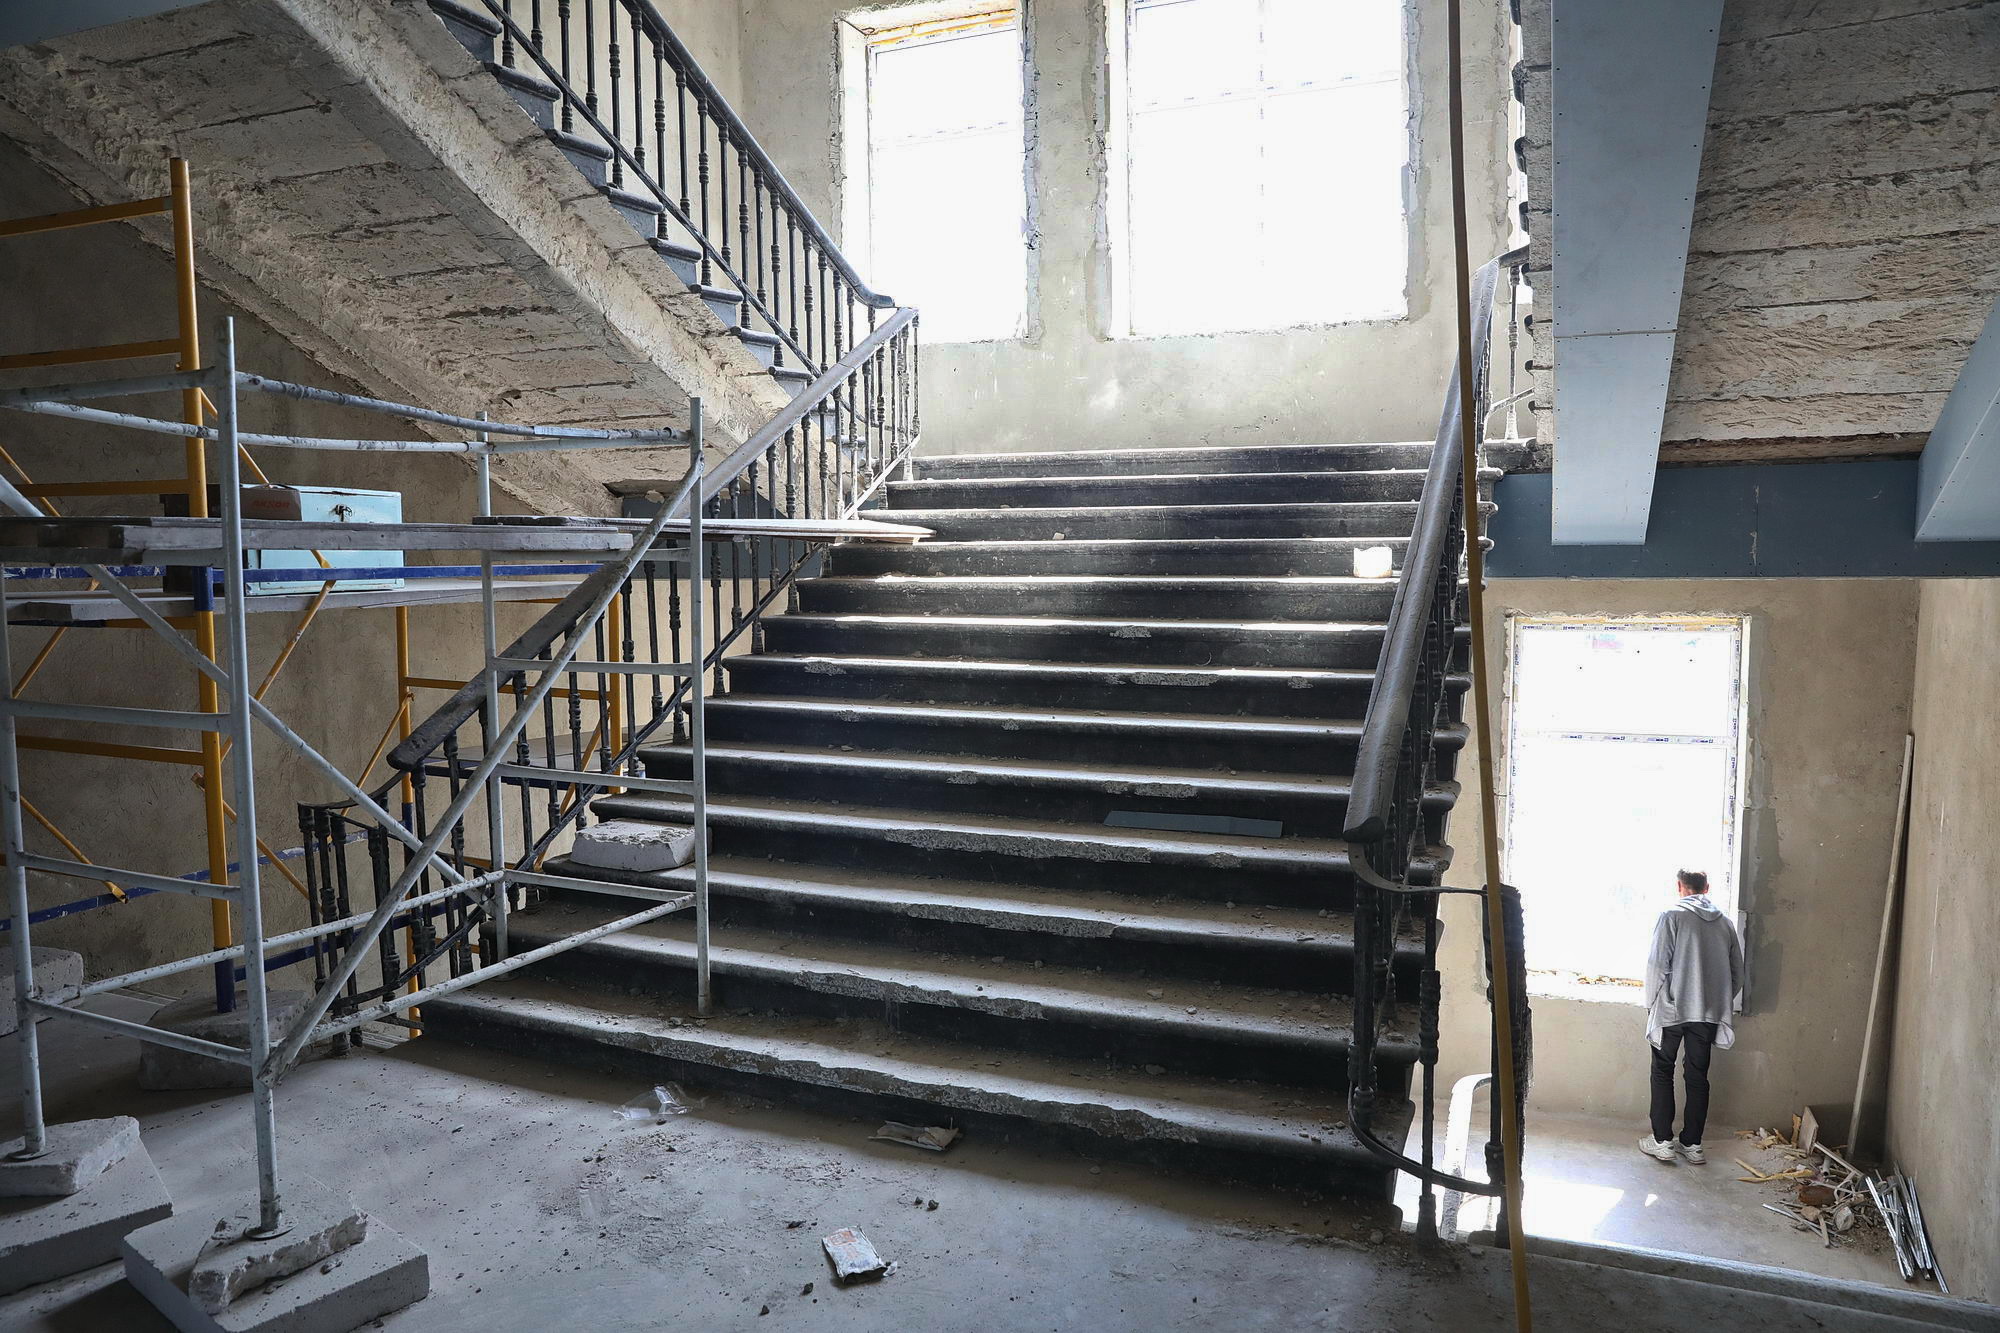 An employee of the Trade Unions House in Odesa stands near the big staircase inside of the building on May 13, 2019. The 42 pro-Russian activists were killed by the fire there on May 2, 2014. The staircase was in the epicenter of that fire.